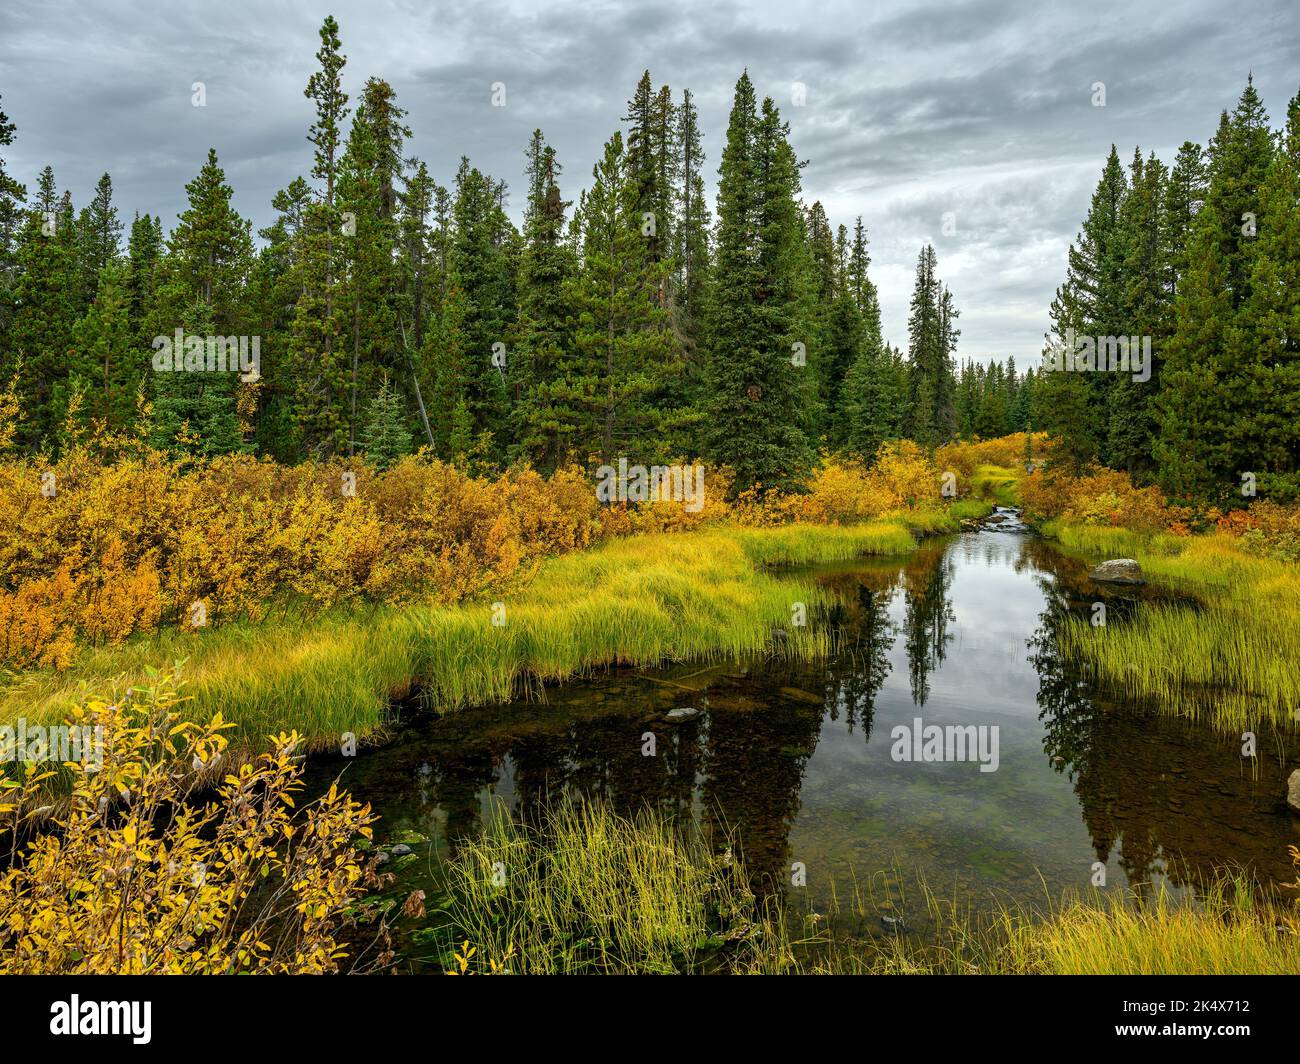 Fall foliage by the Green River in Tweedsmuir South Provincial Park, British Columbia, Canada Stock Photo